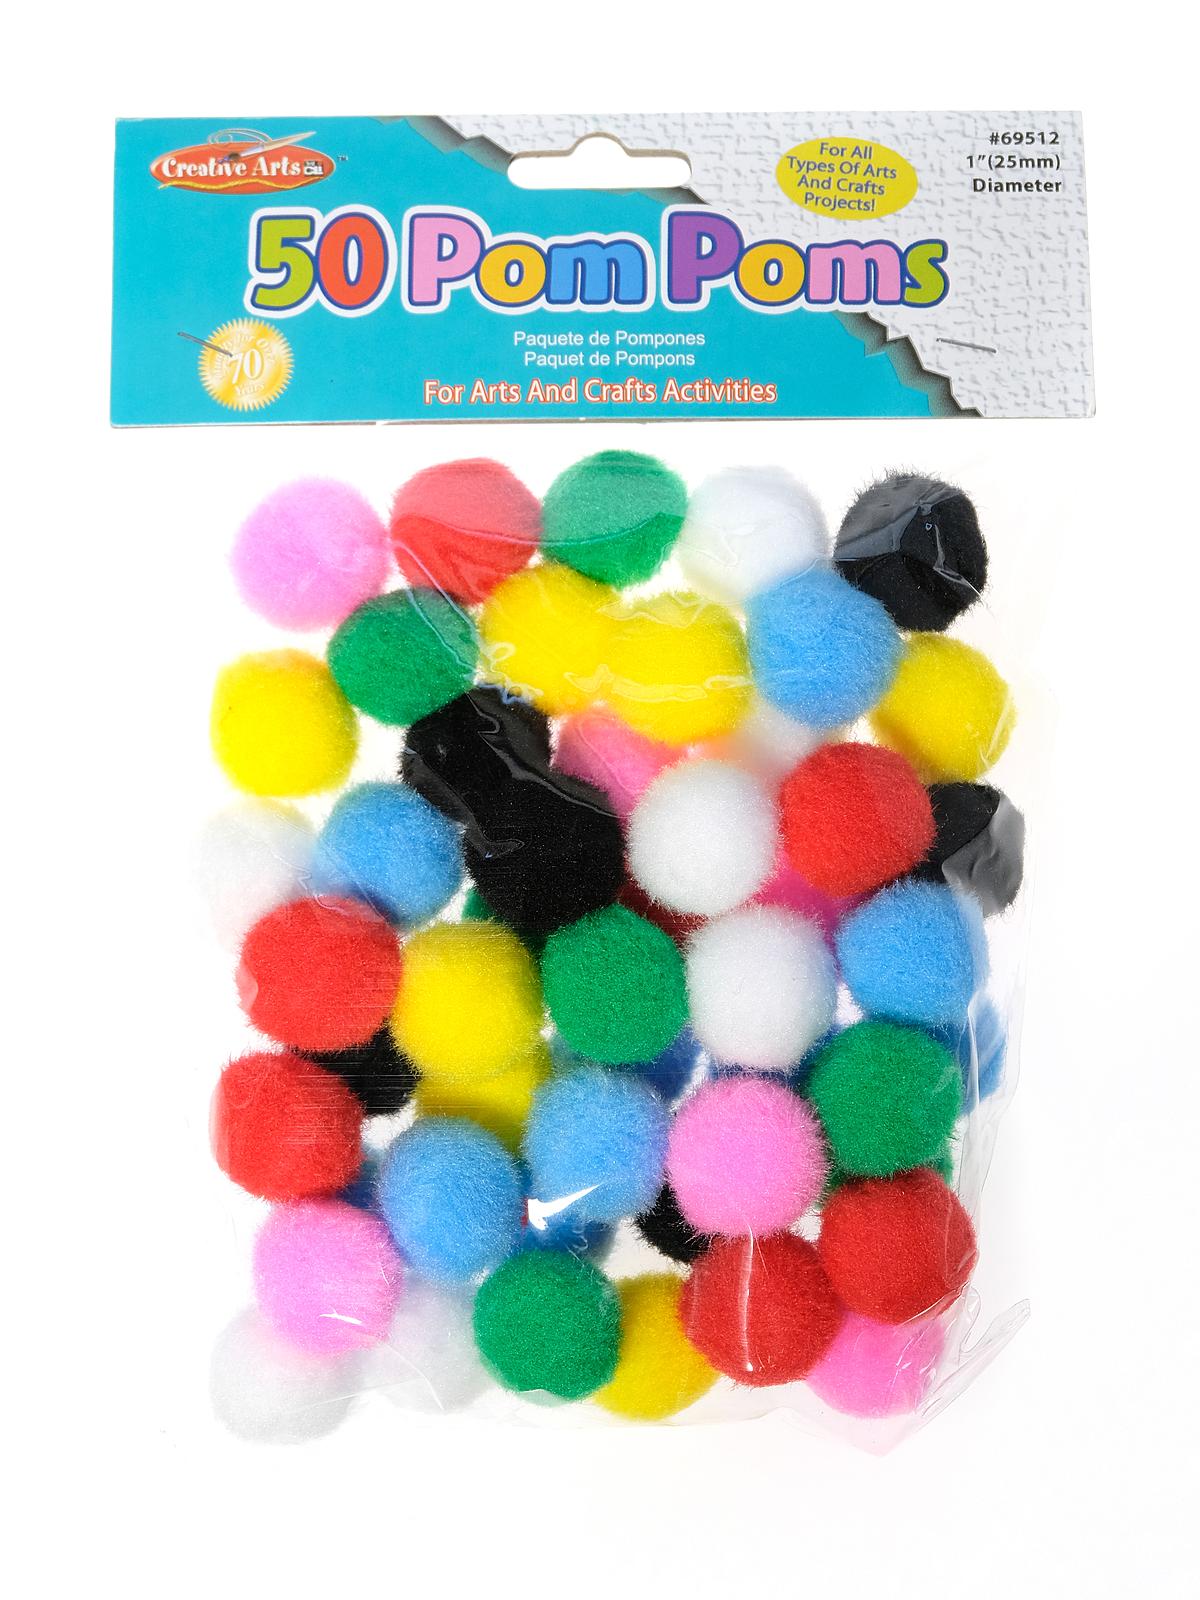 Pom-poms Bright Hues 100 Pieces 1 2 In.